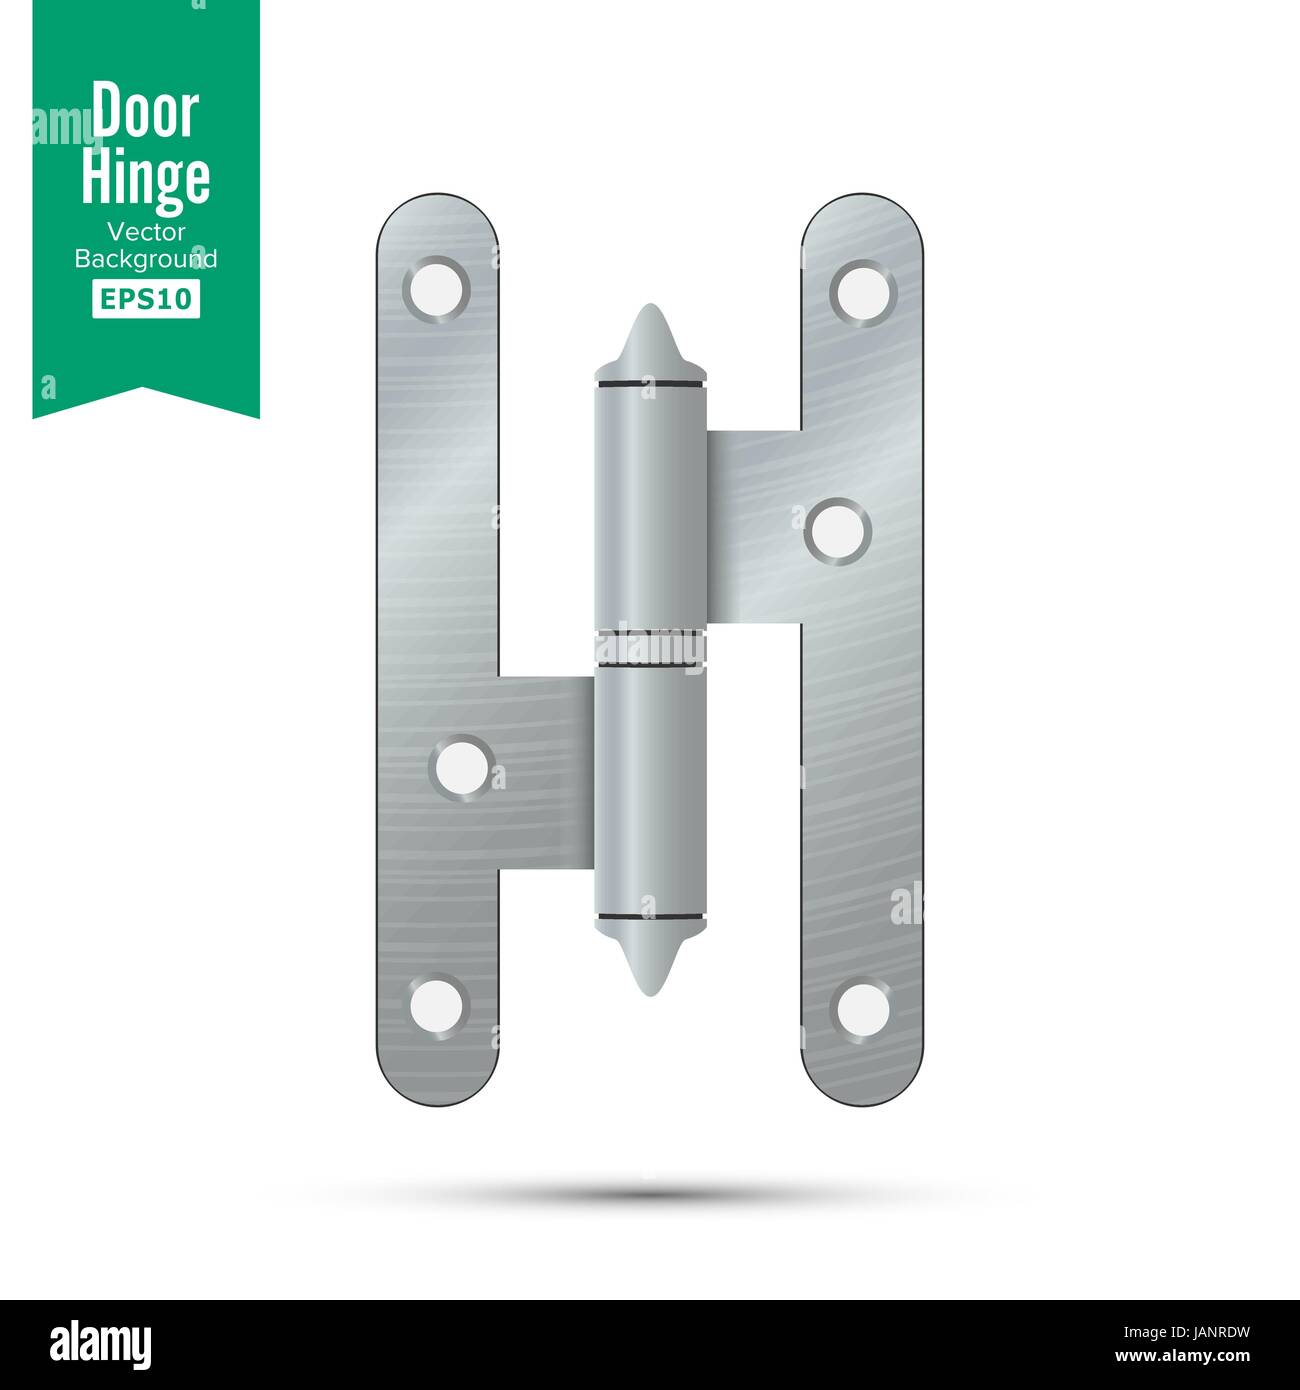 Small Hinges For Doors On A White Background Stock Photo, Picture and  Royalty Free Image. Image 29609582.